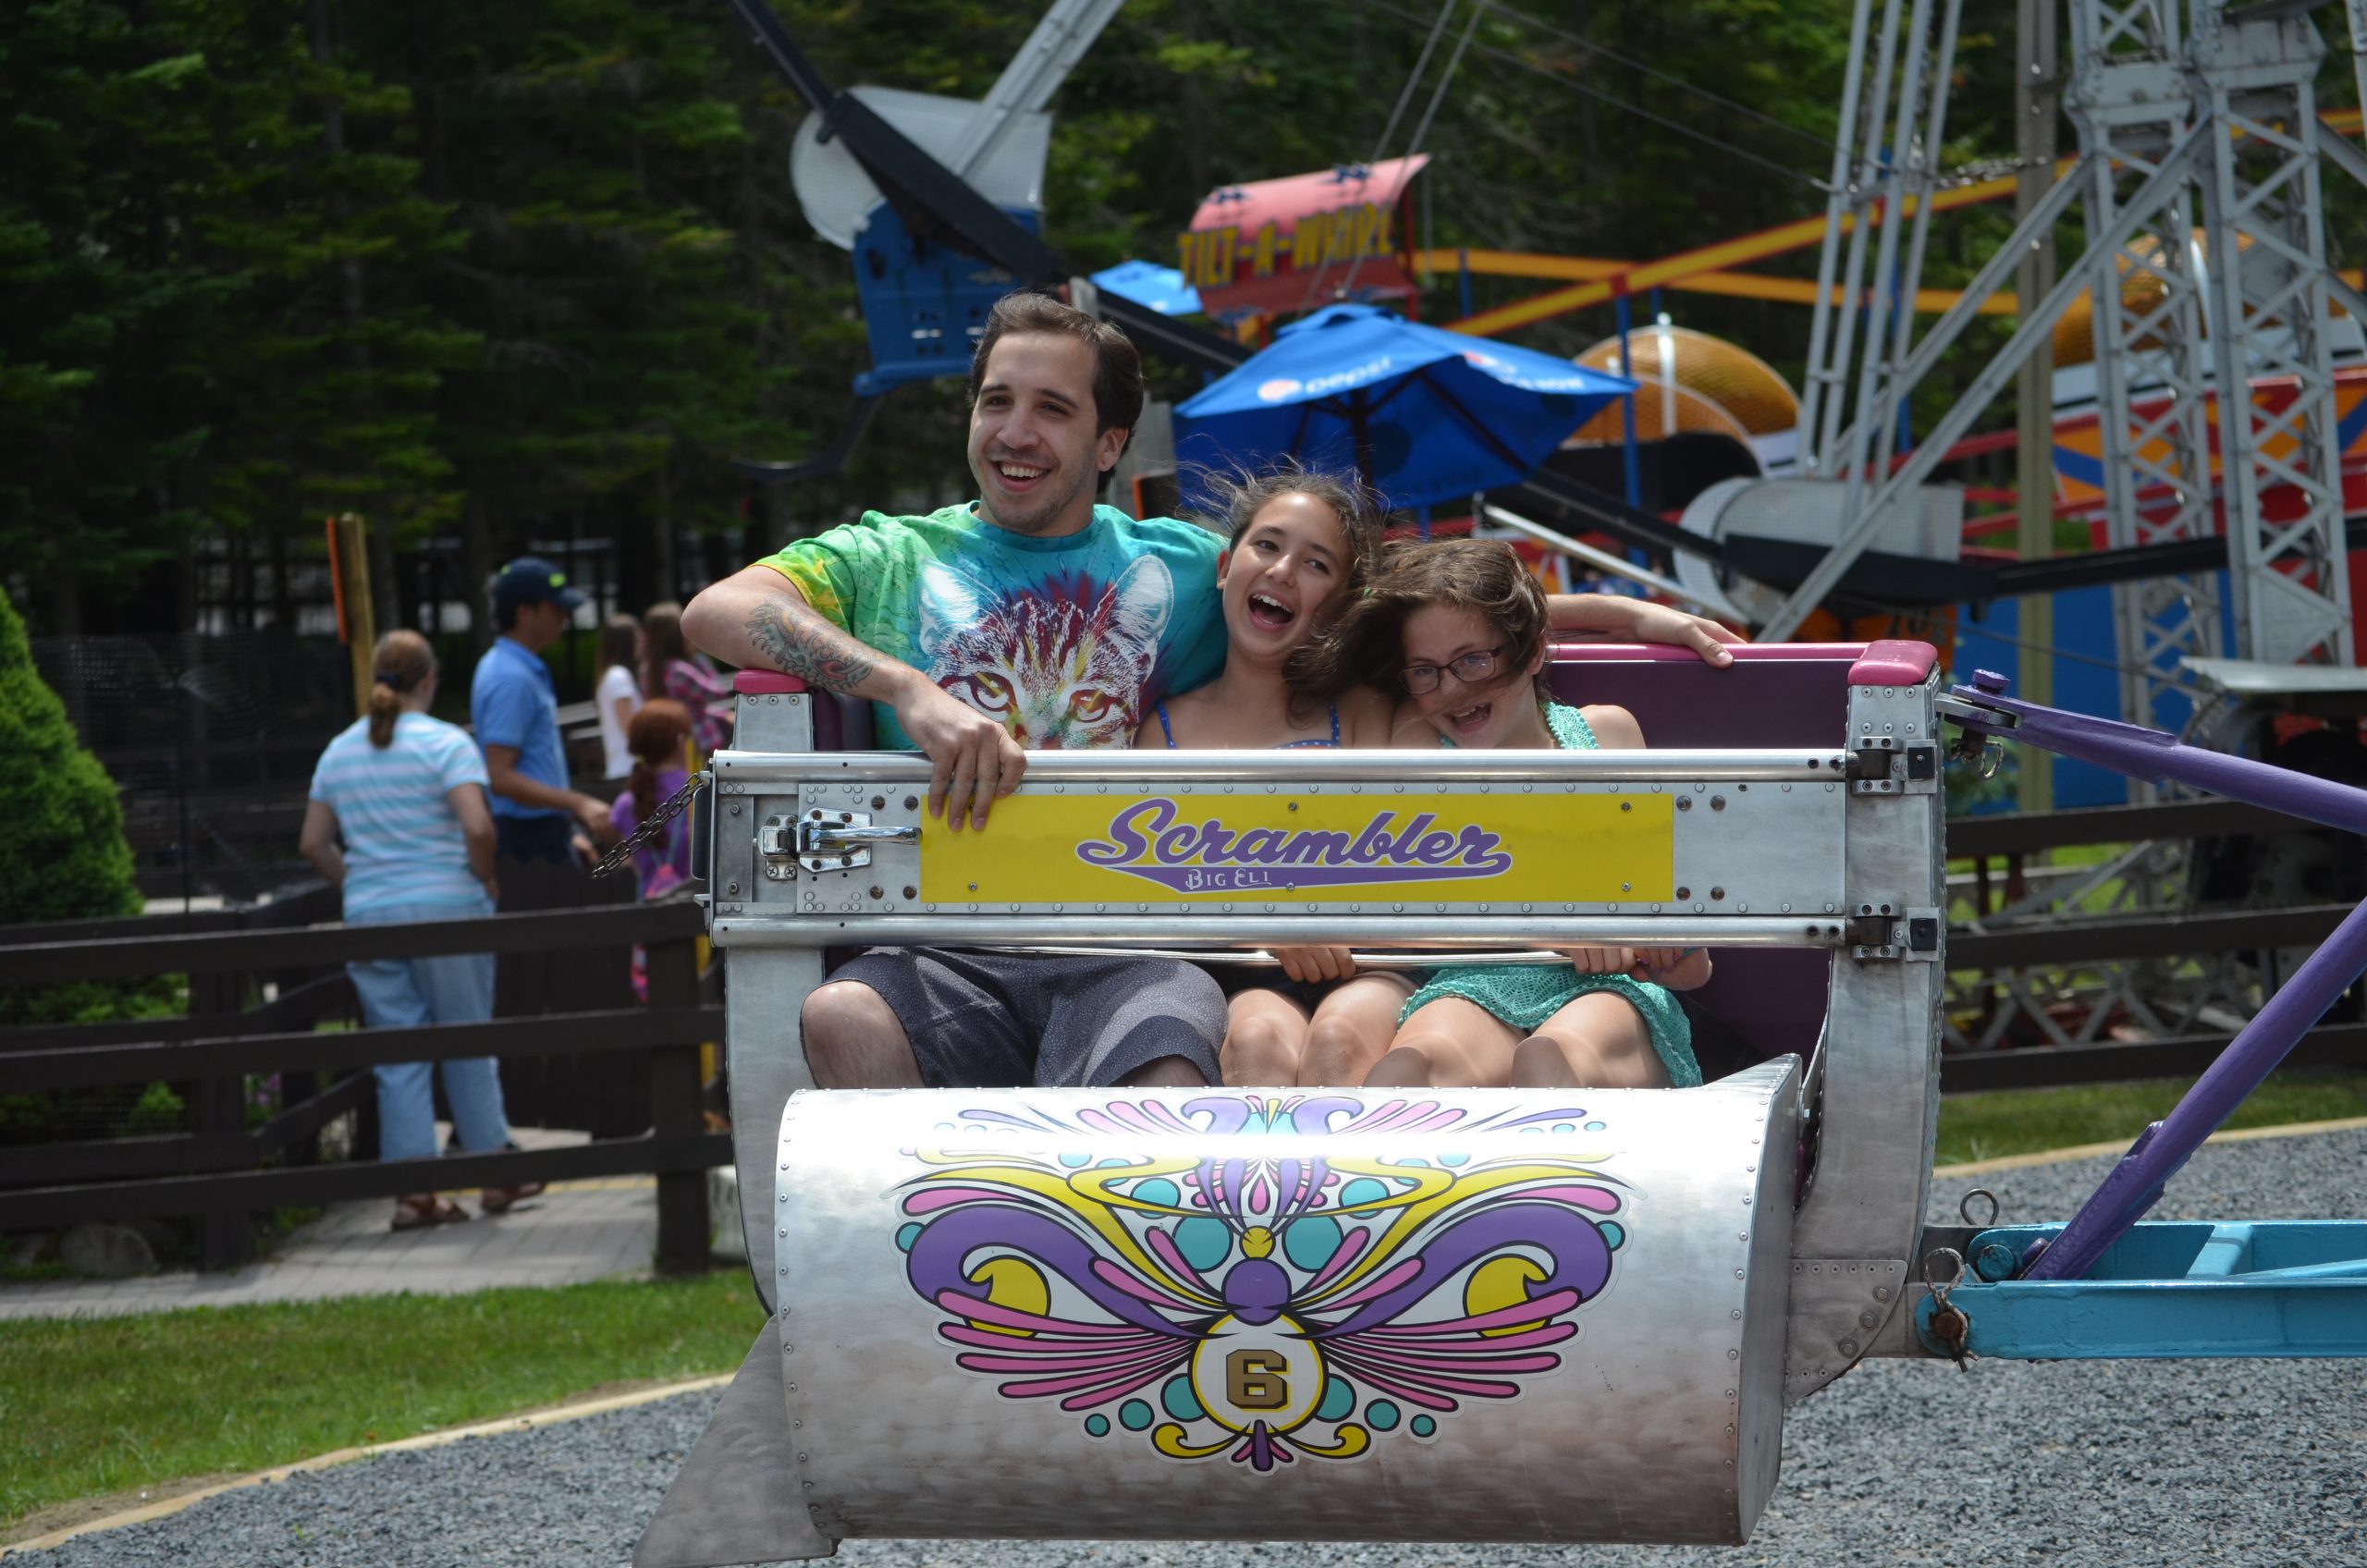 An image of three people, a man and two young girls, laughing and smiling as the ride the Scrambler.